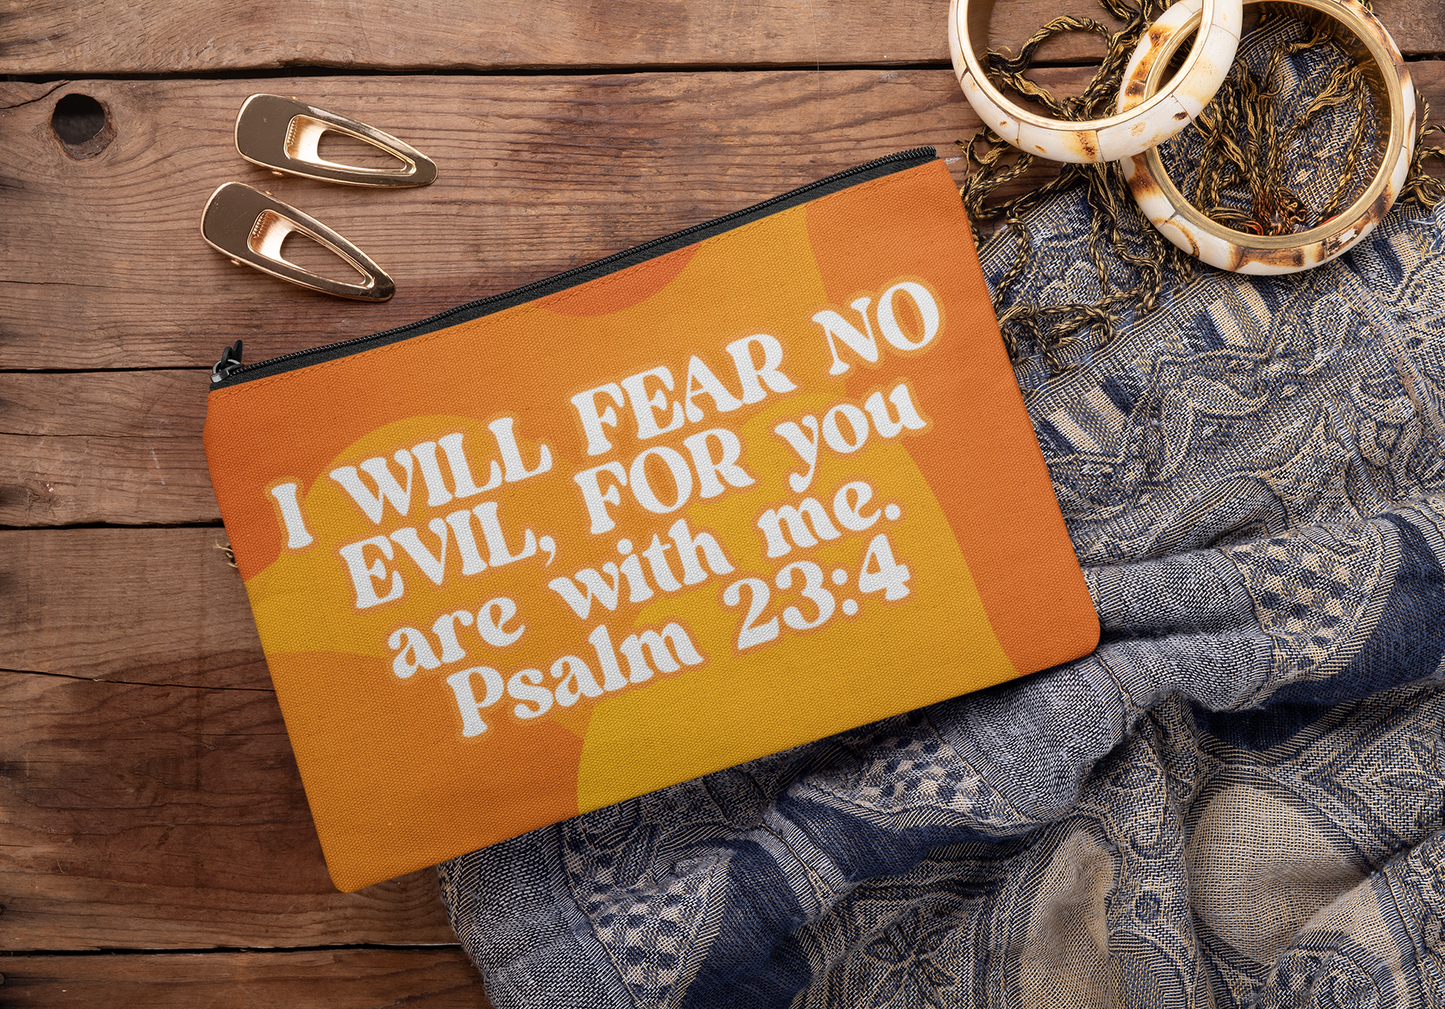 I Will Fear No Evil, For You Are With Me Pouch